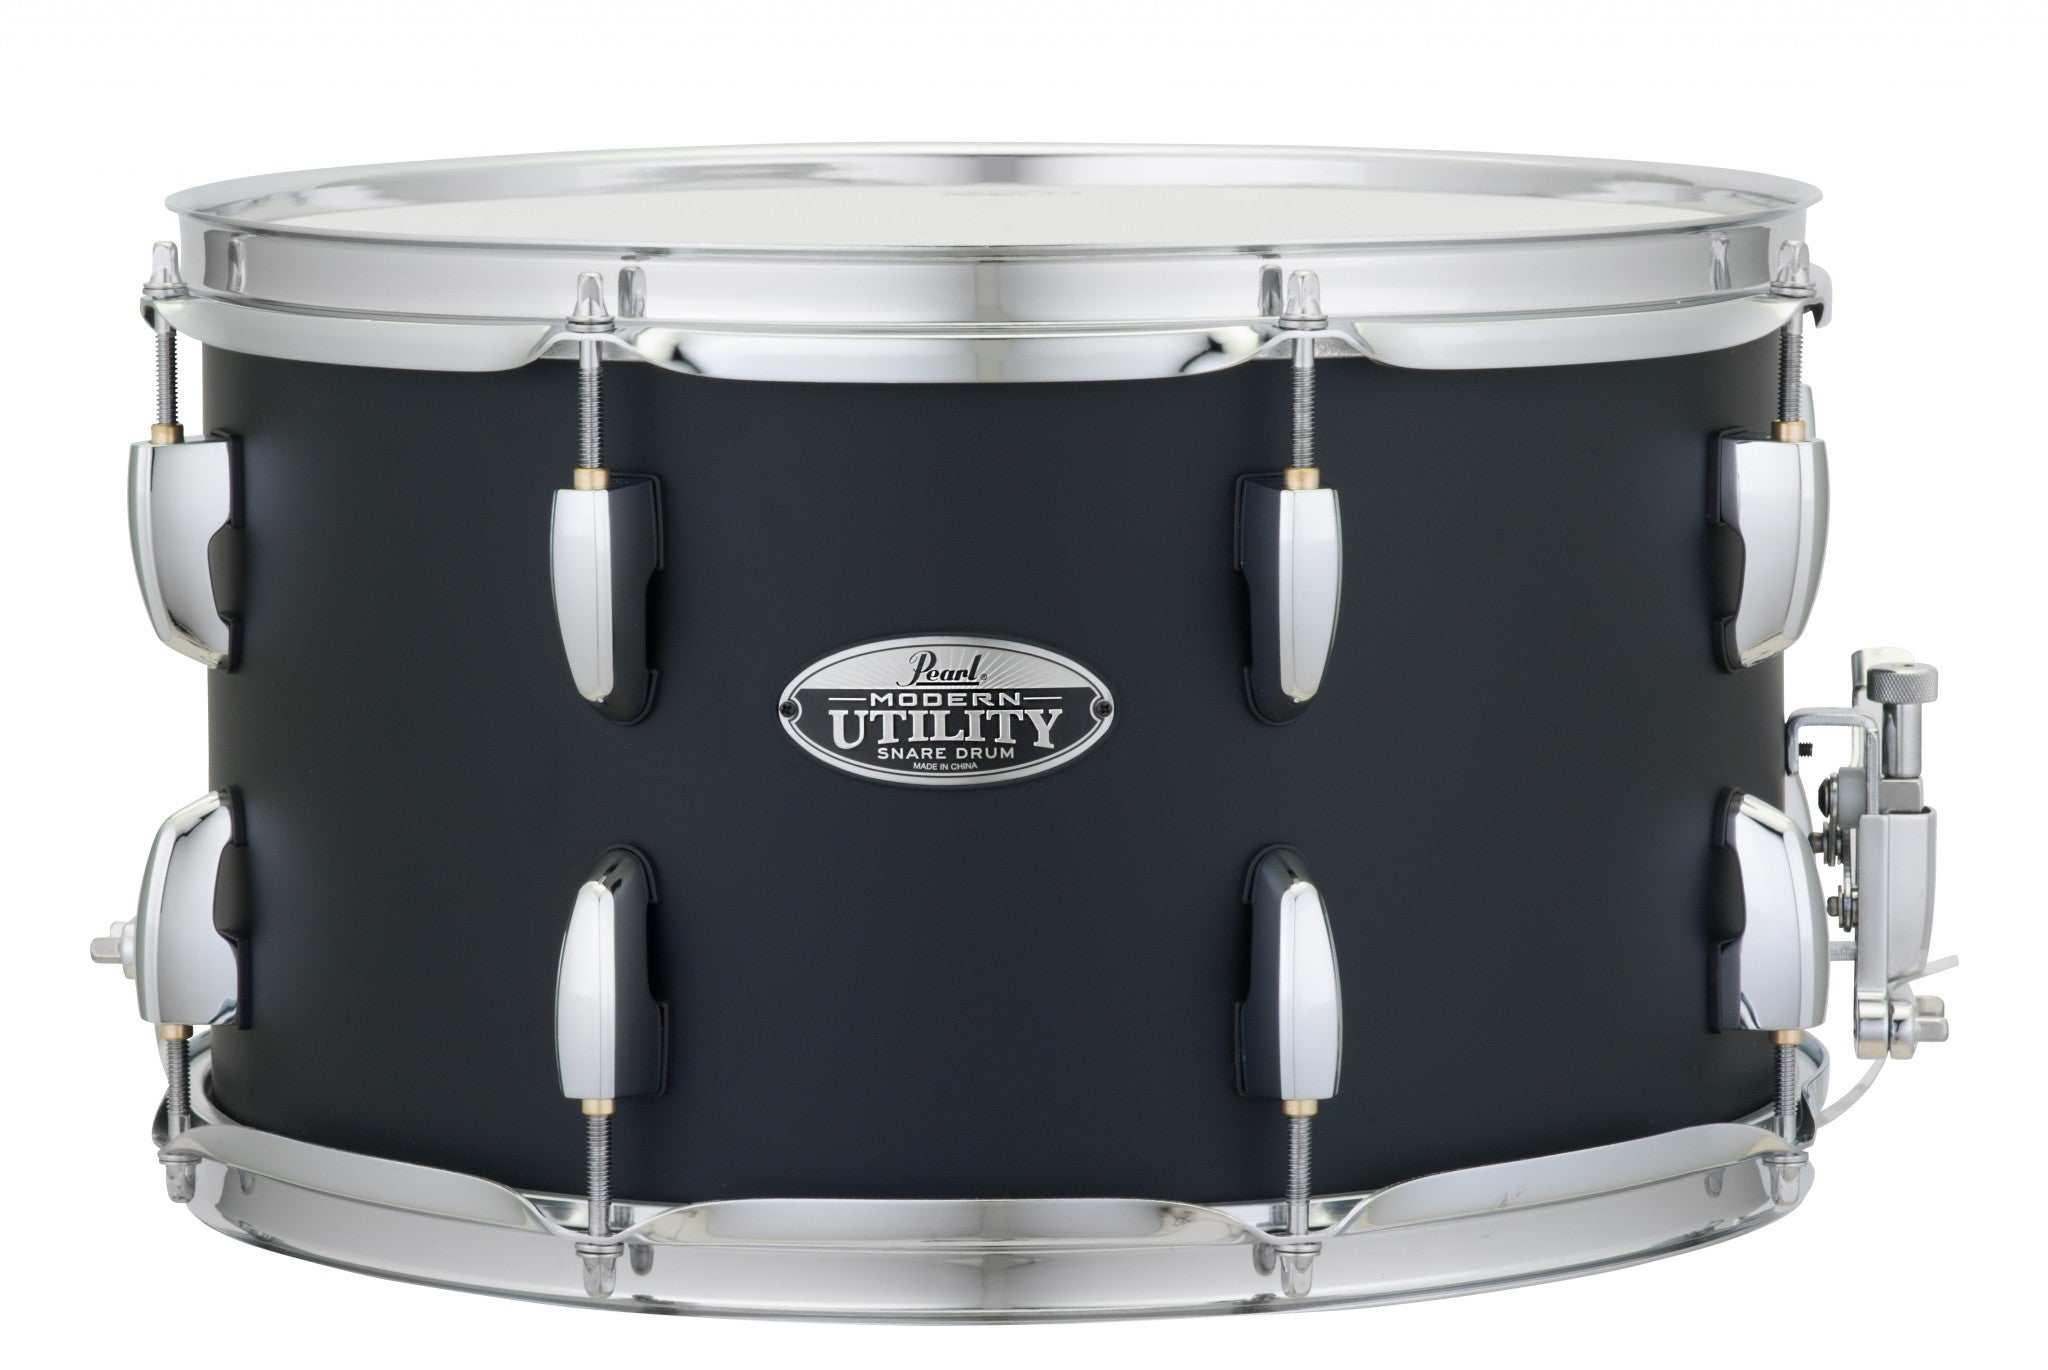 PEARL Modern Utility Maple 14" x 8" Snare Drum (Available in 2 colors)